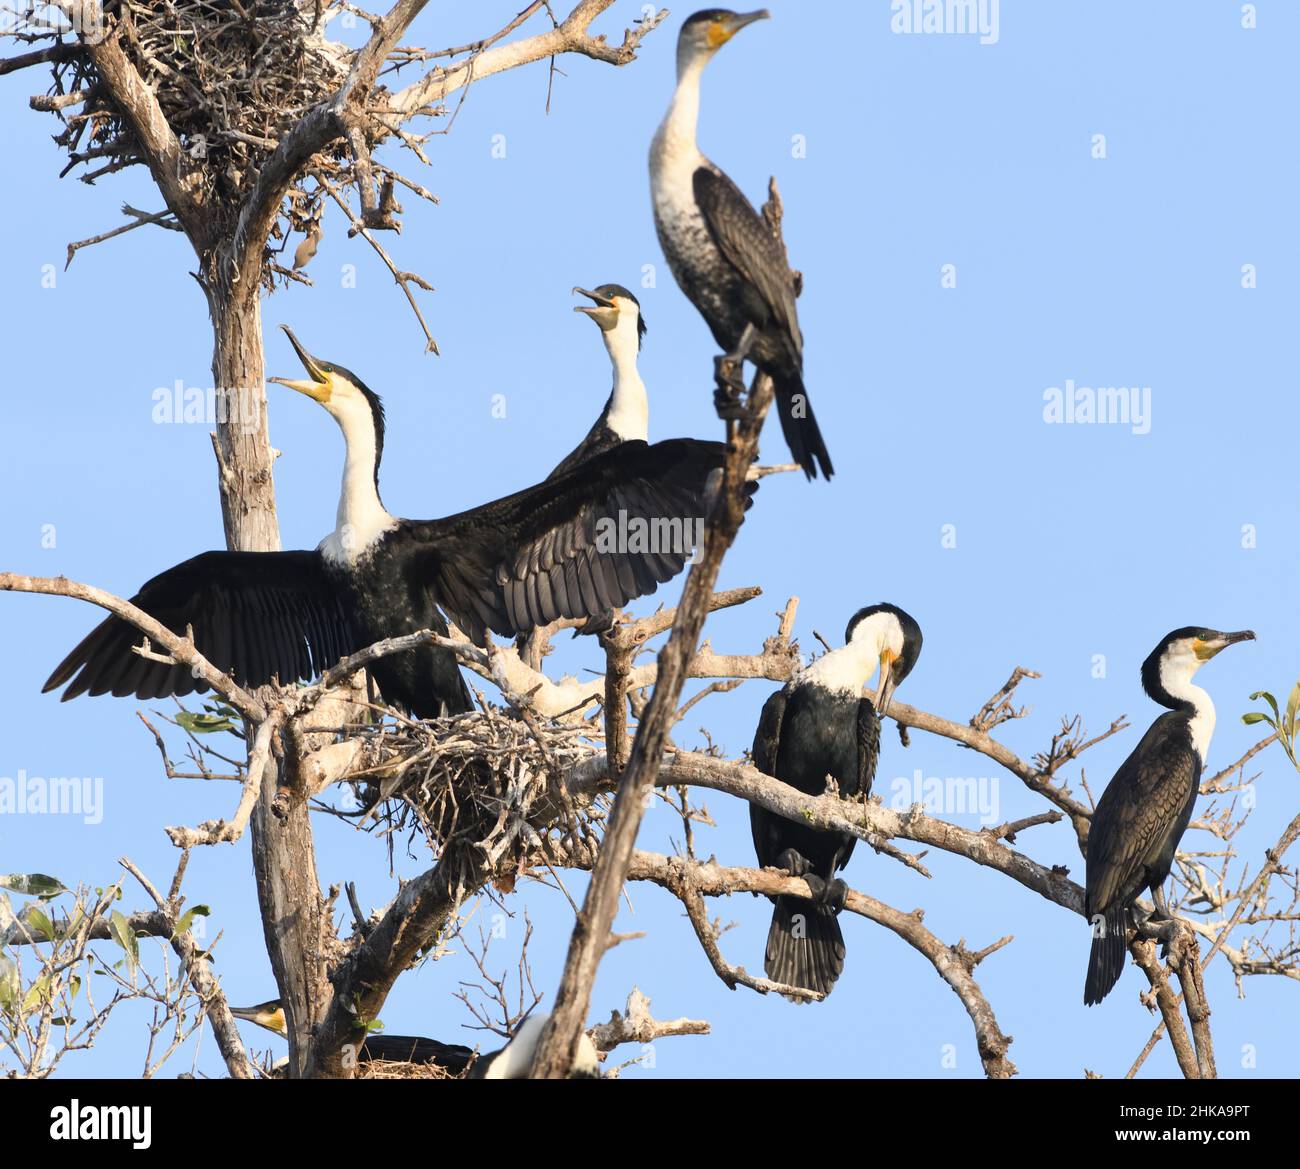 White-breasted cormorants (Phalacrocorax lucidus) at their nesting site above a creek off the Gambia River. Tendaba, The Republic of the Gambia. Stock Photo